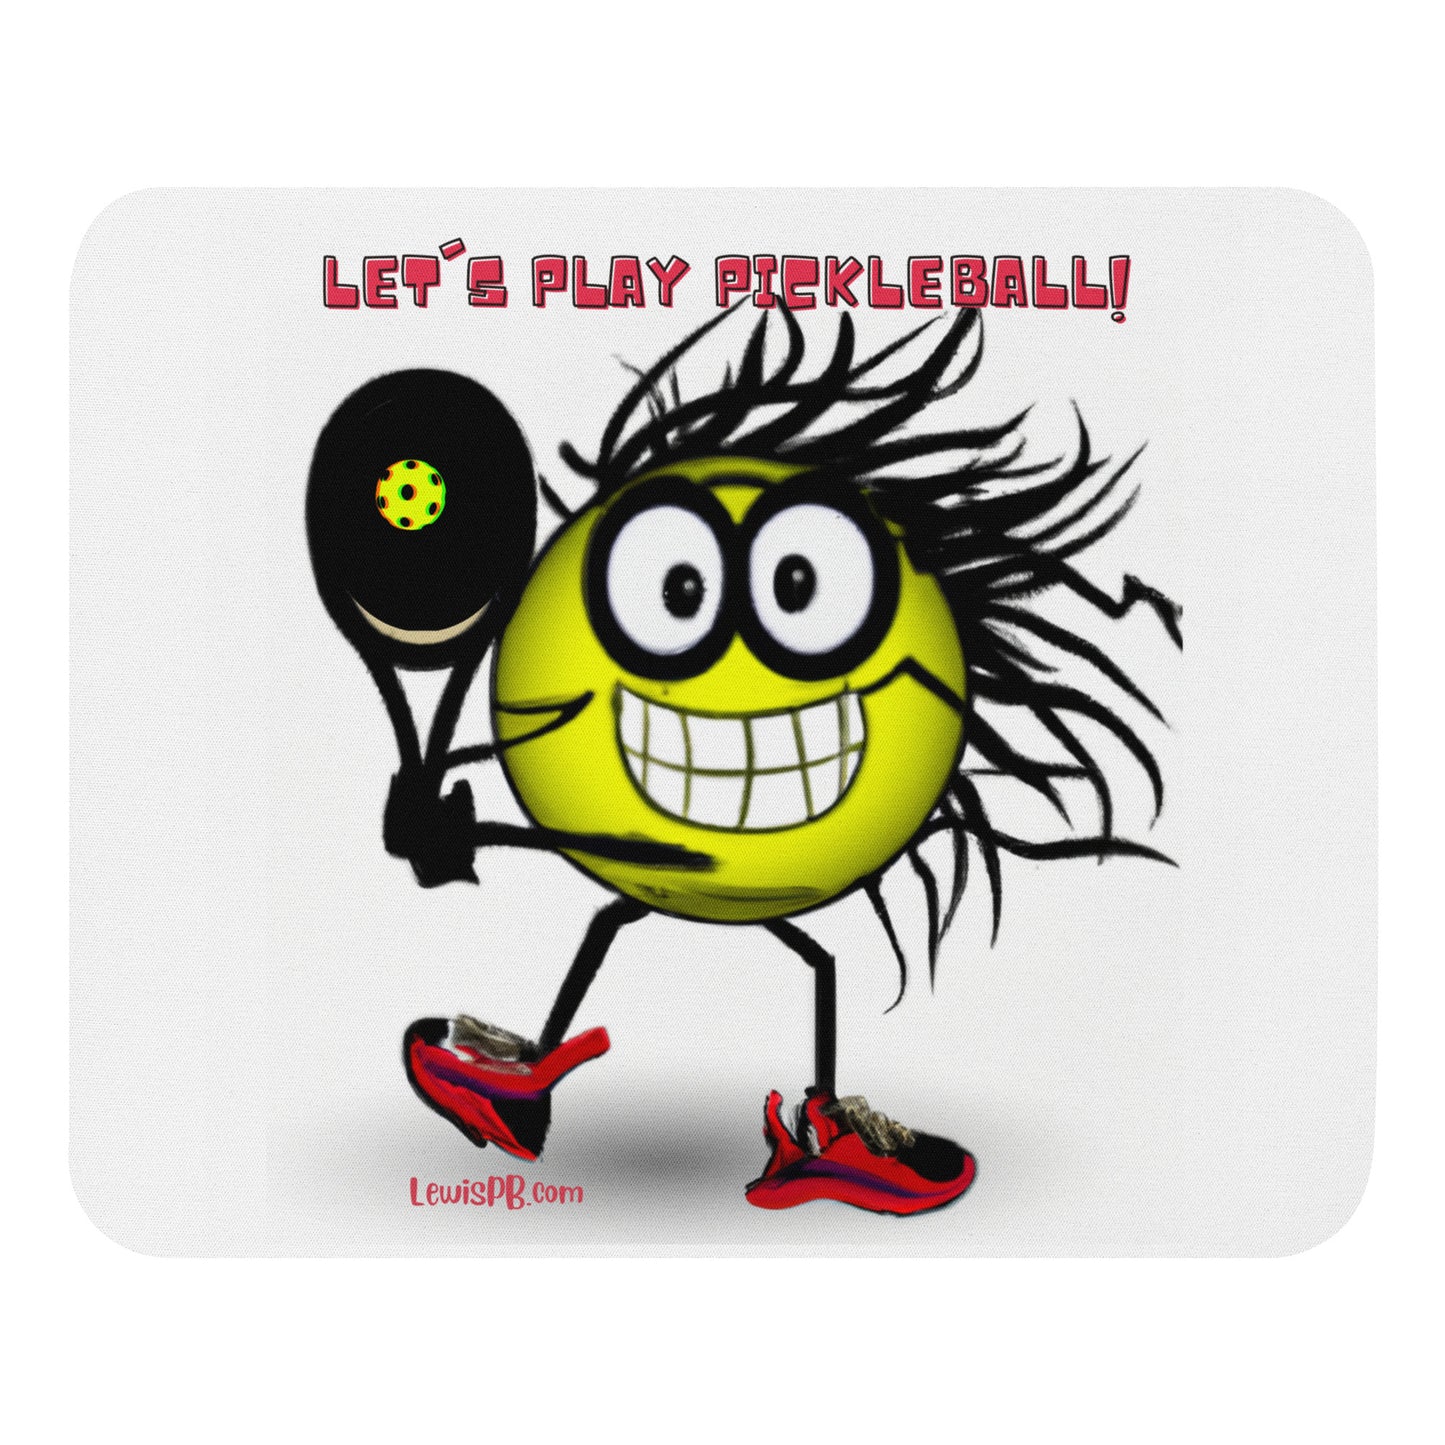 Pickleball Mouse Pad | "Let's Play Pickleball"